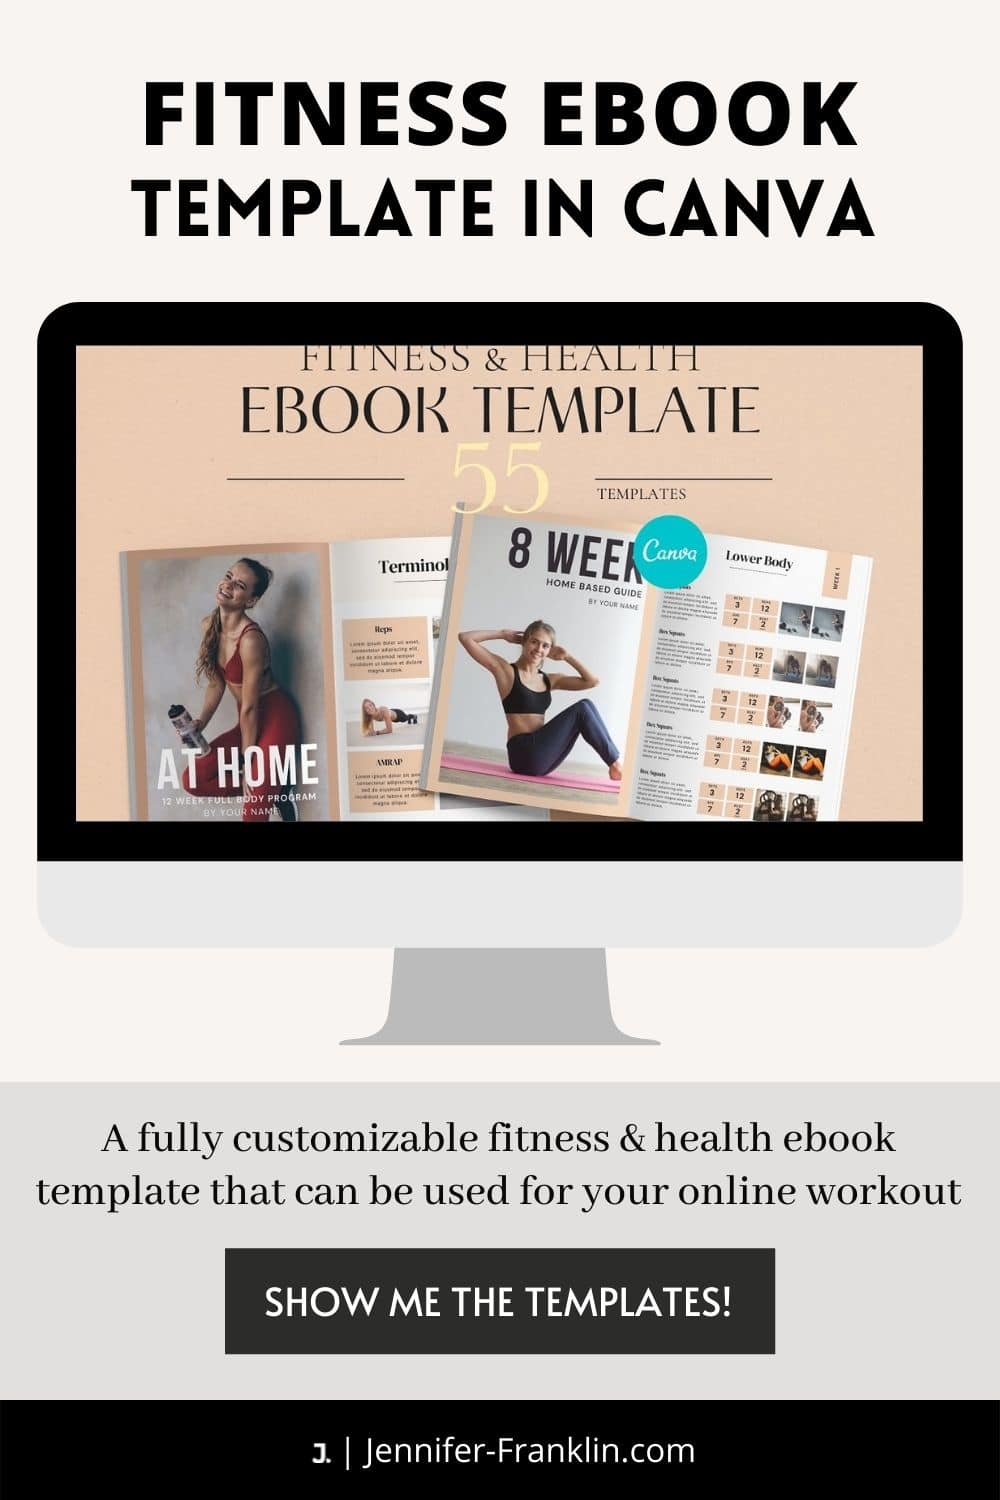 Fitness Ebook Template in Canva